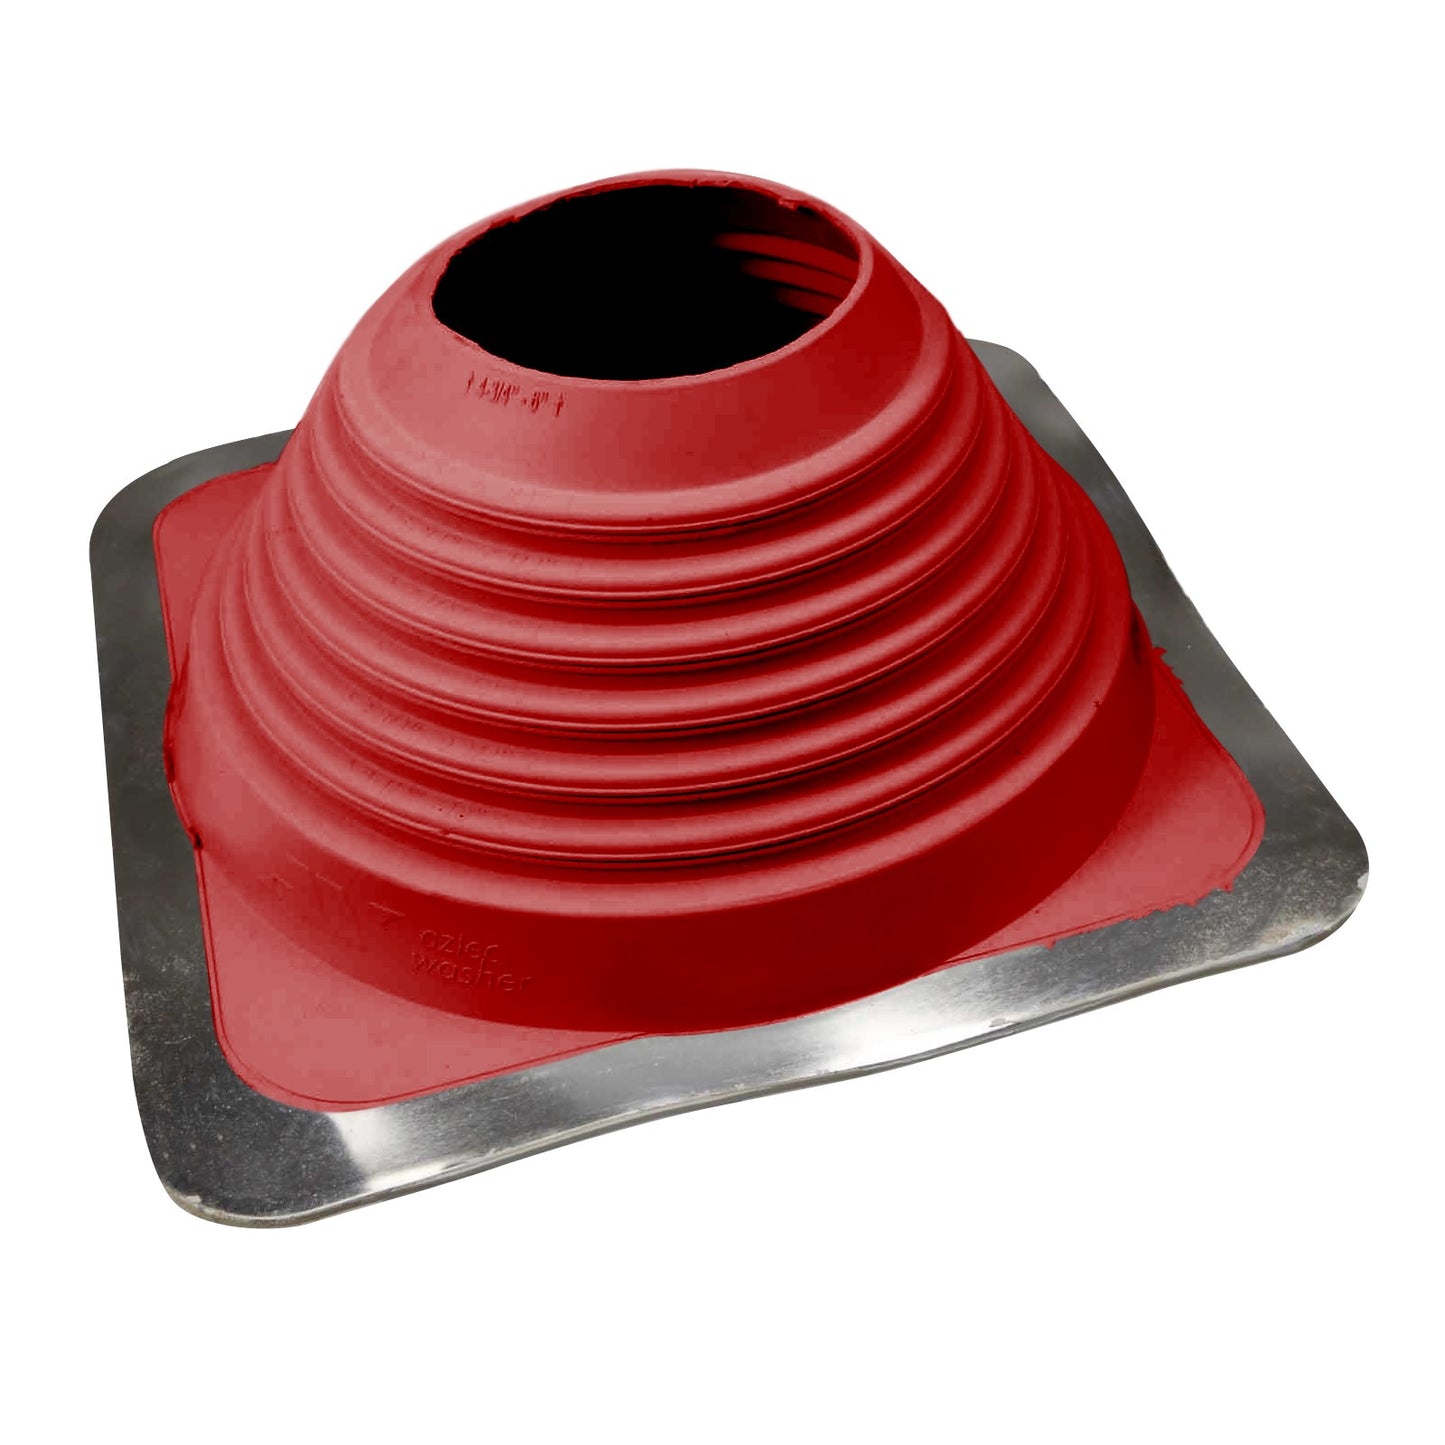 #6 Roofjack Square EPDM Pipe Flashing Boot Bright Red